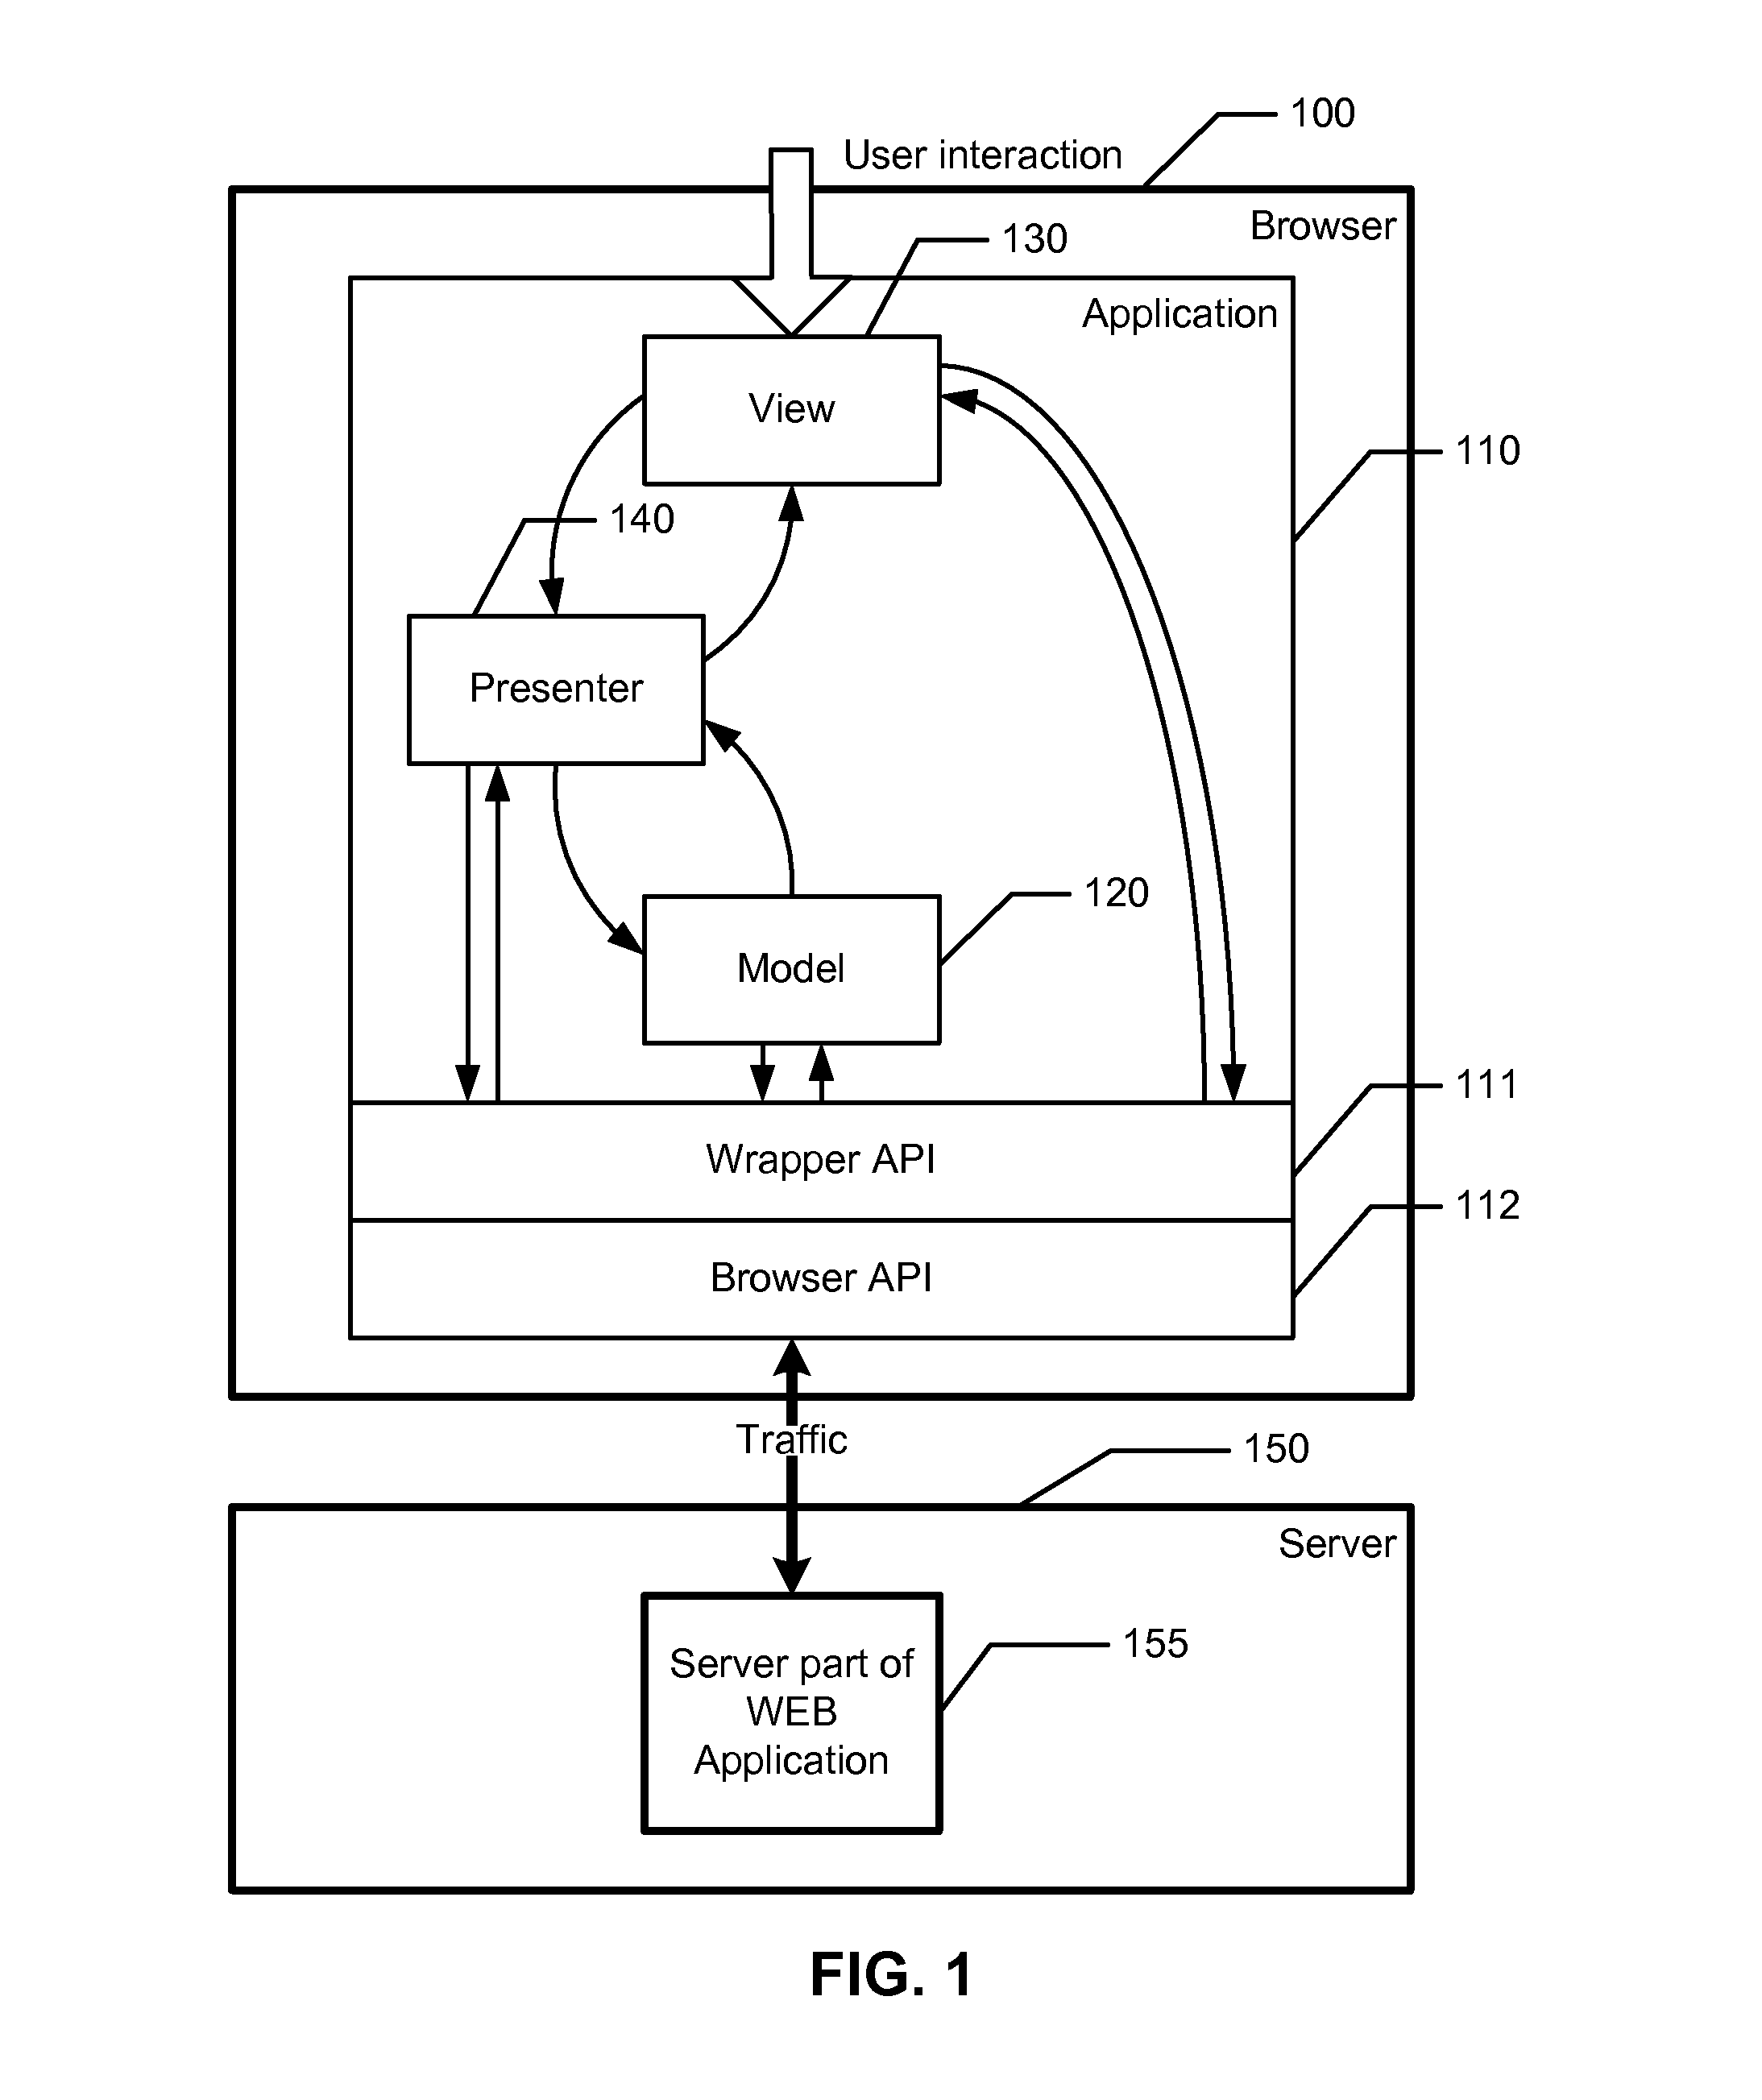 Method and system for automated load testing of web applications